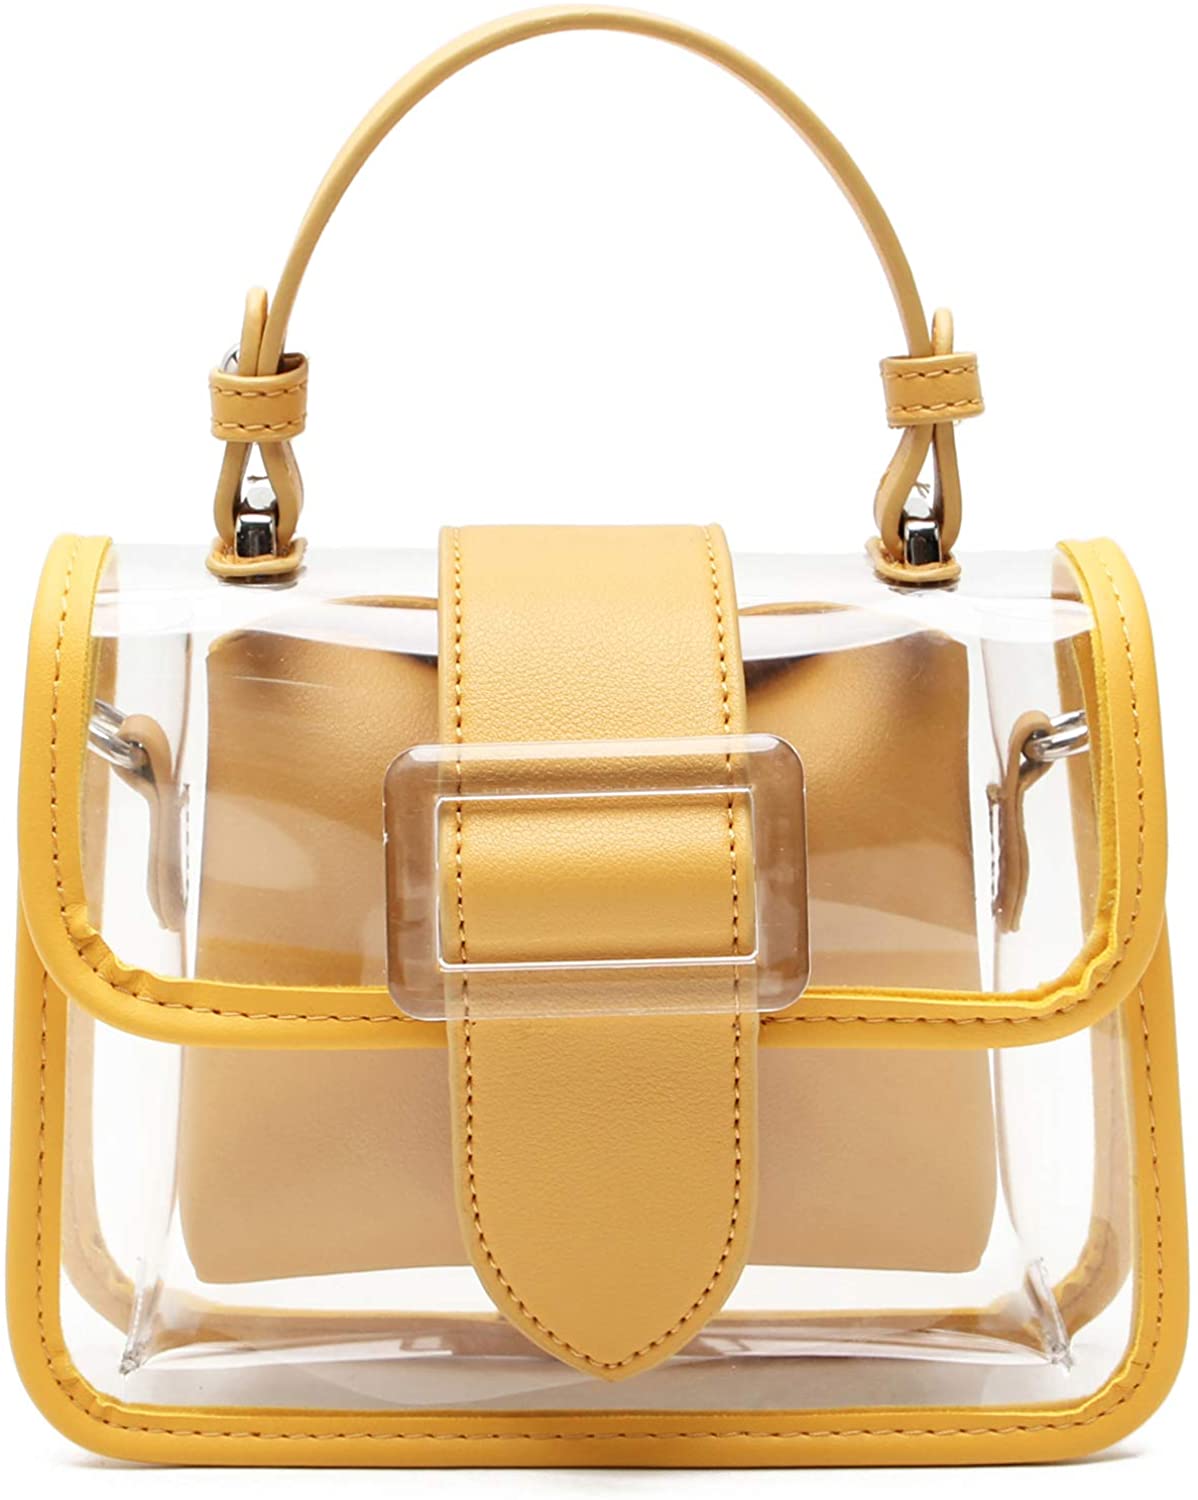 COACH F52800 - ENVOY CROSSBODY IN POLISHED PEBBLE LEATHER - LIGHT GOLD/PALE  YELLOW | COACH HANDBAGS